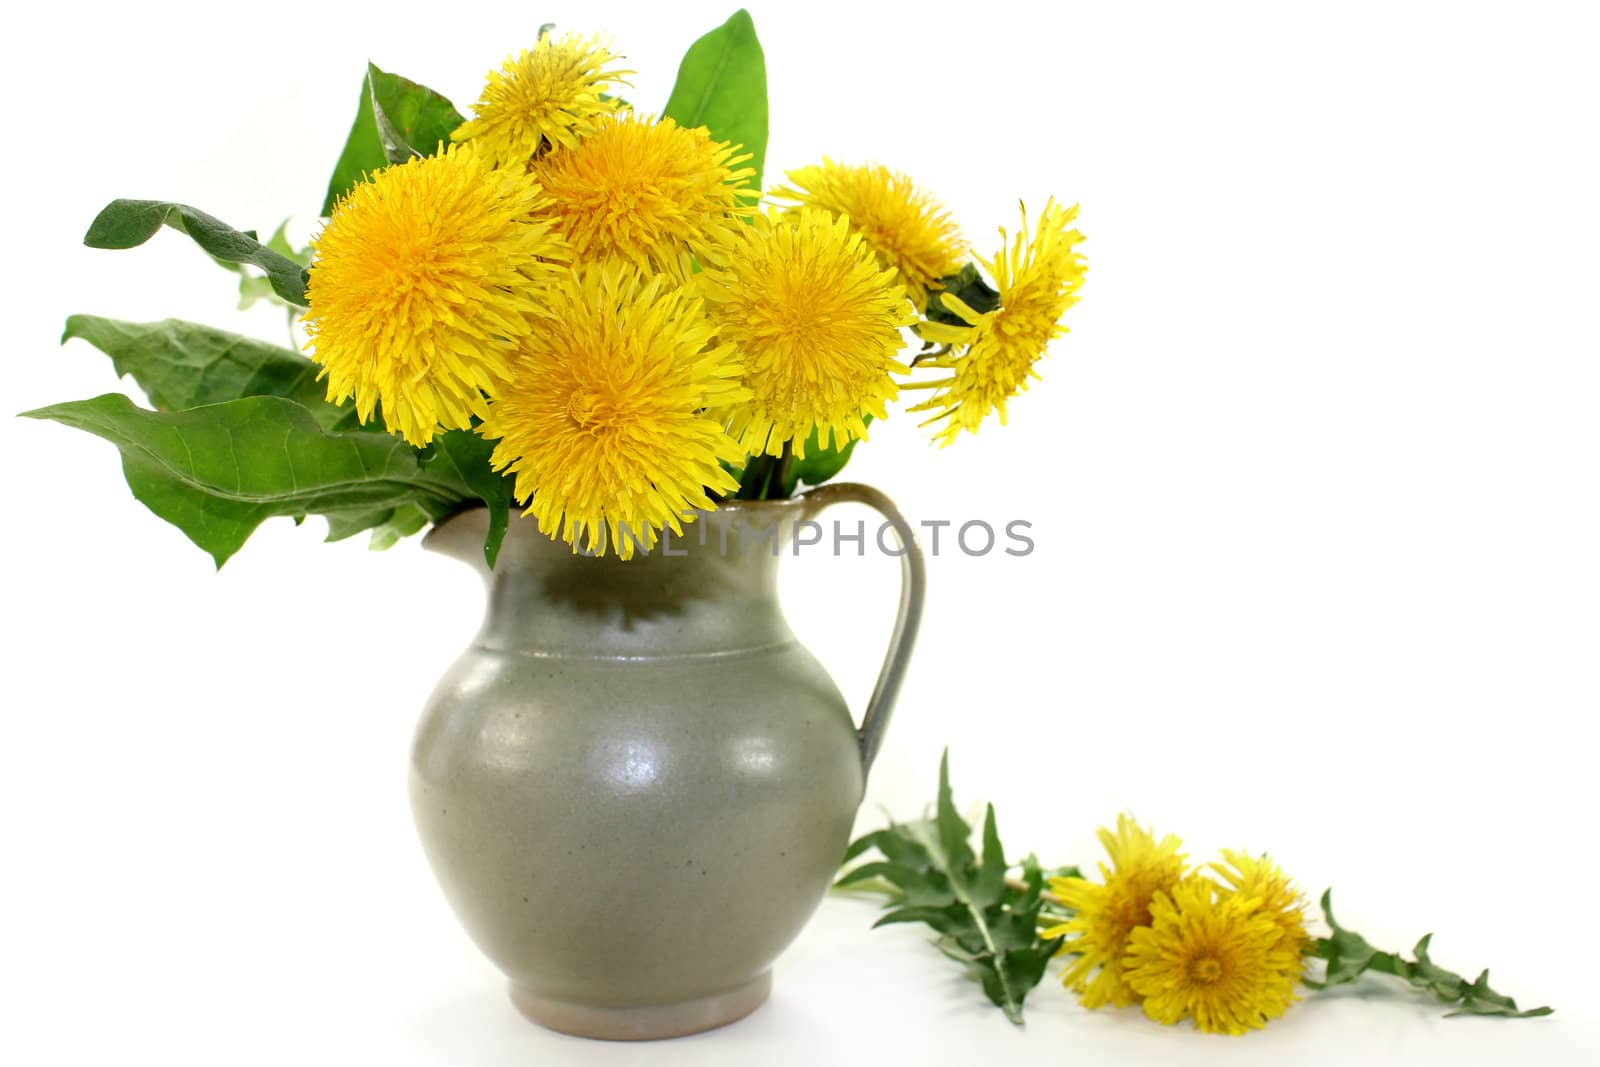 Dandelion leaves and flowers against white background